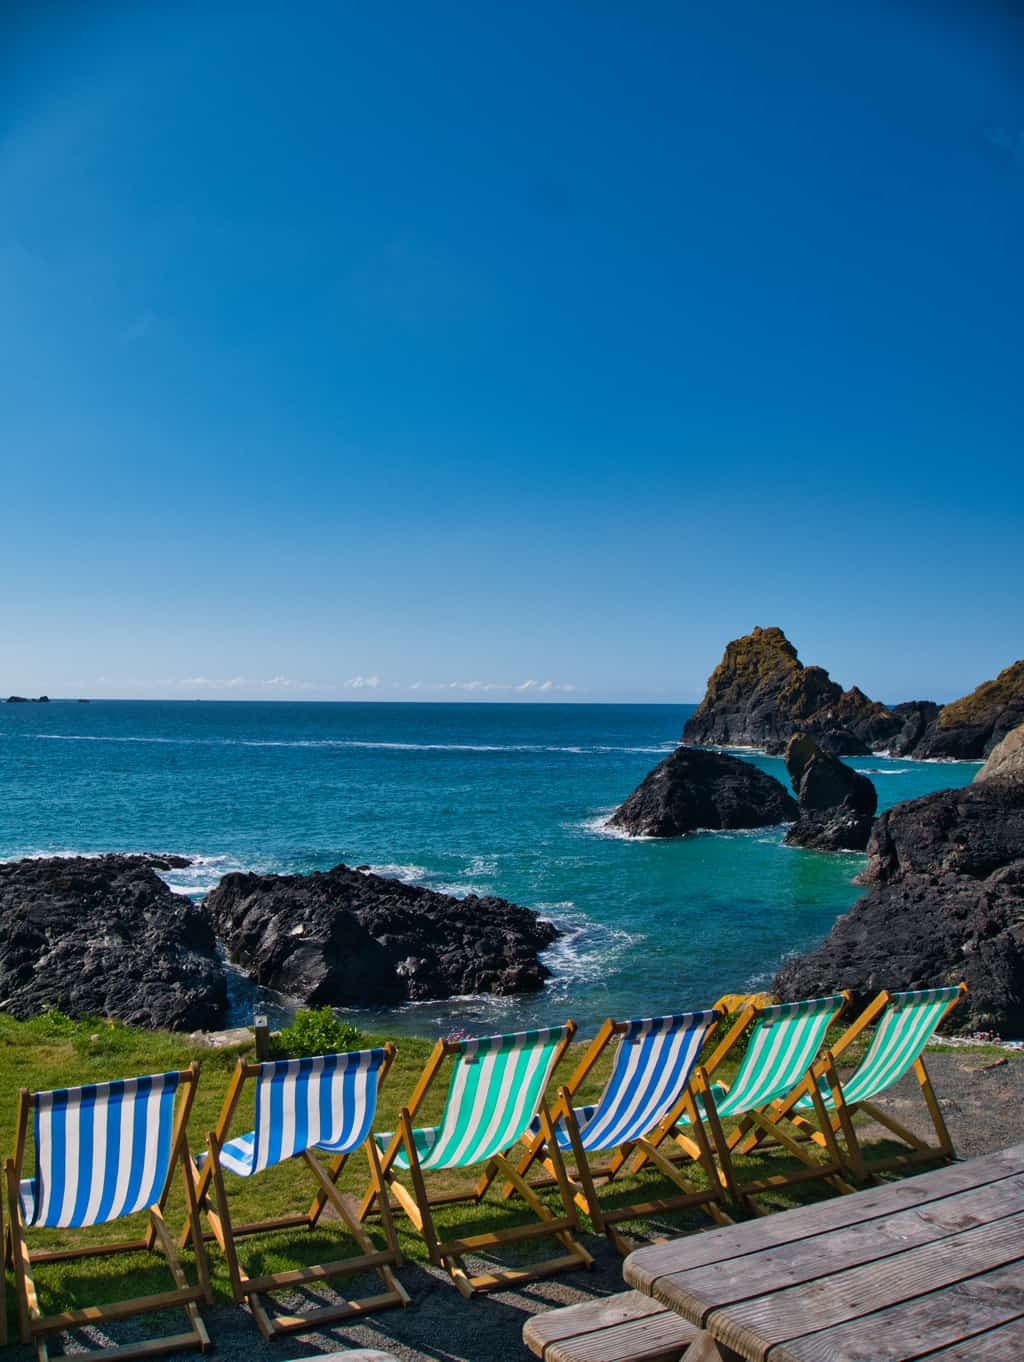 Blue and green deck chairs looking out over the blue water at Kynance Cove with blue sky